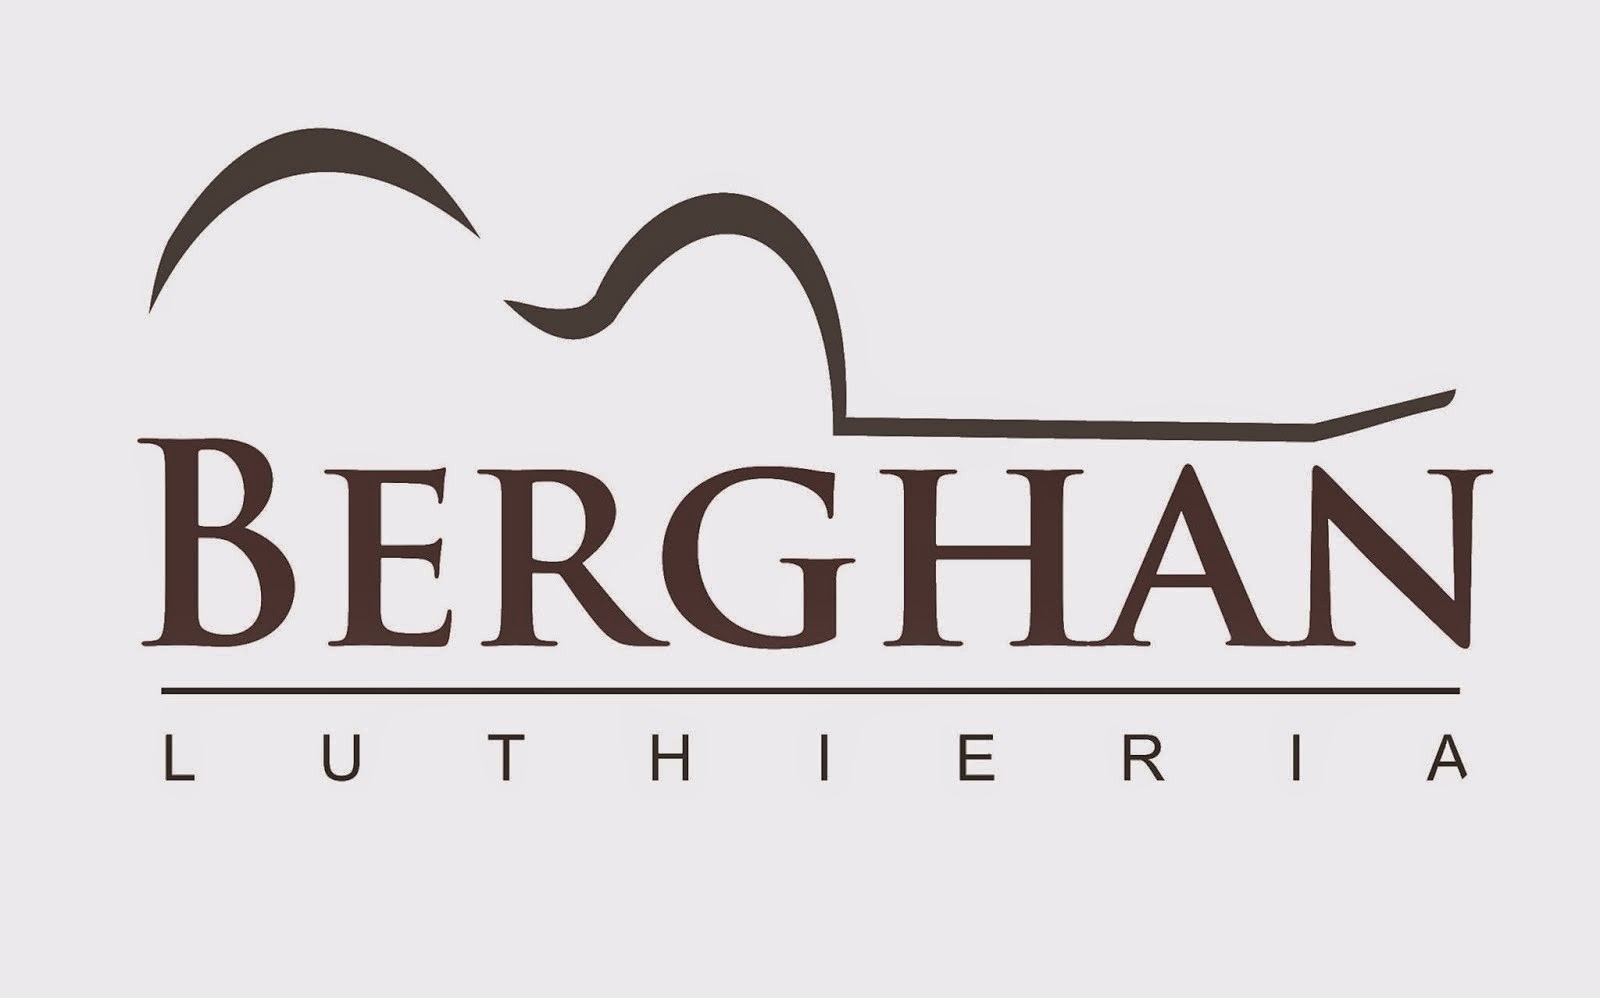 Berghan Luthieria